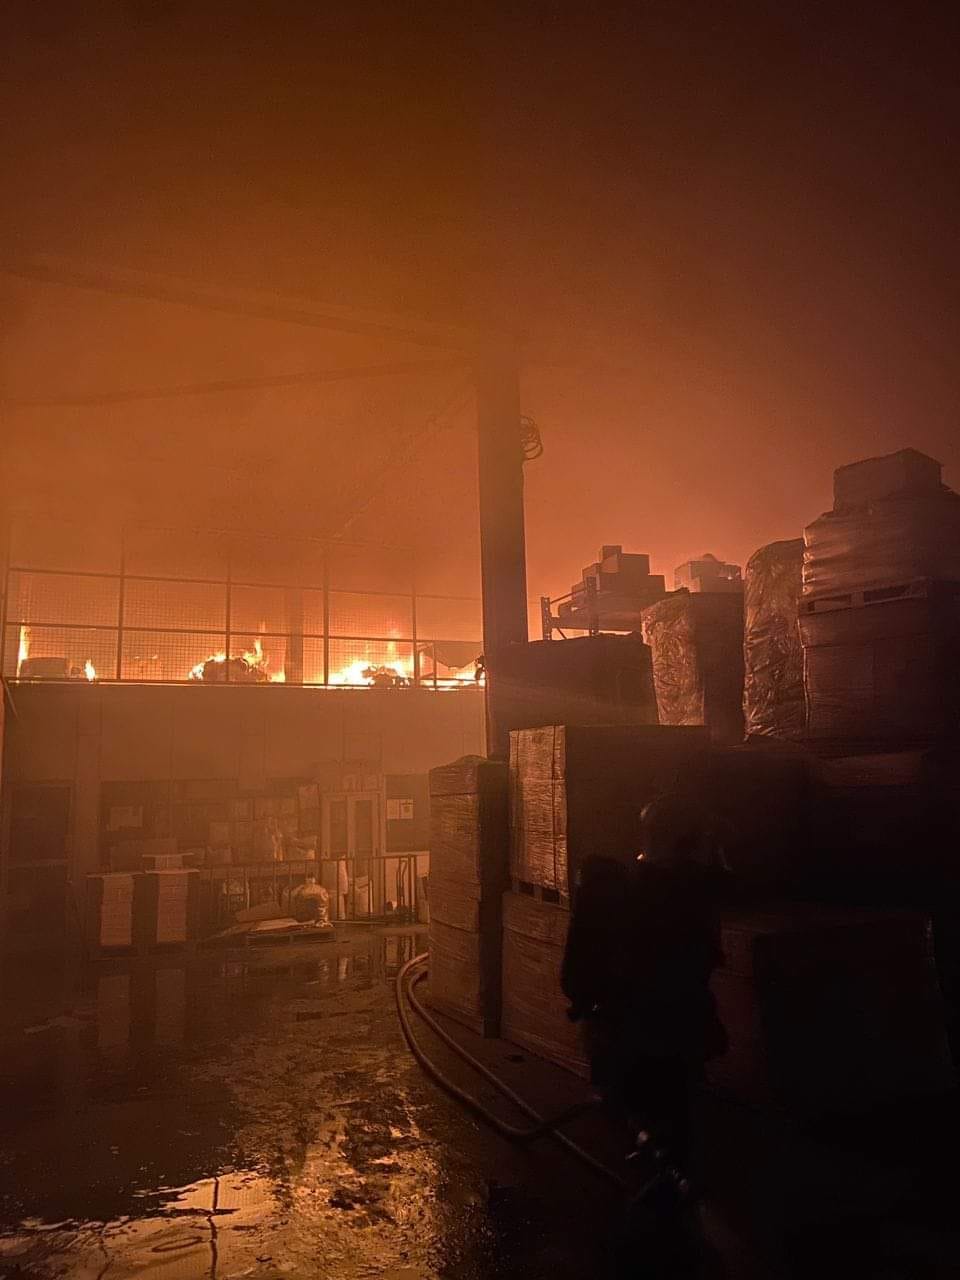 Fire engulfs paint powder processing factory in pj, no casualties reported | weirdkaya